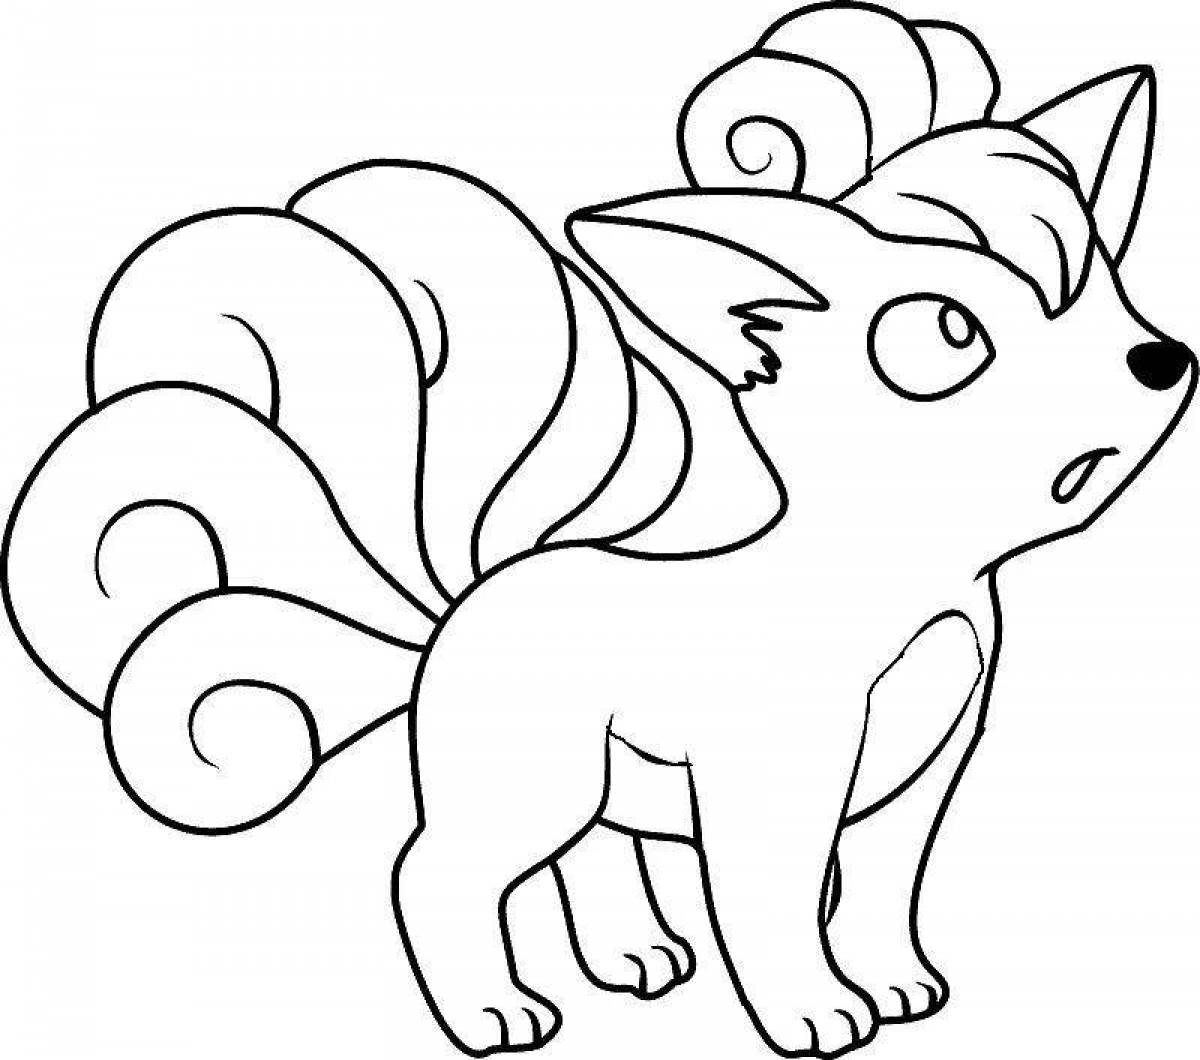 Chooch meow's amazing coloring page